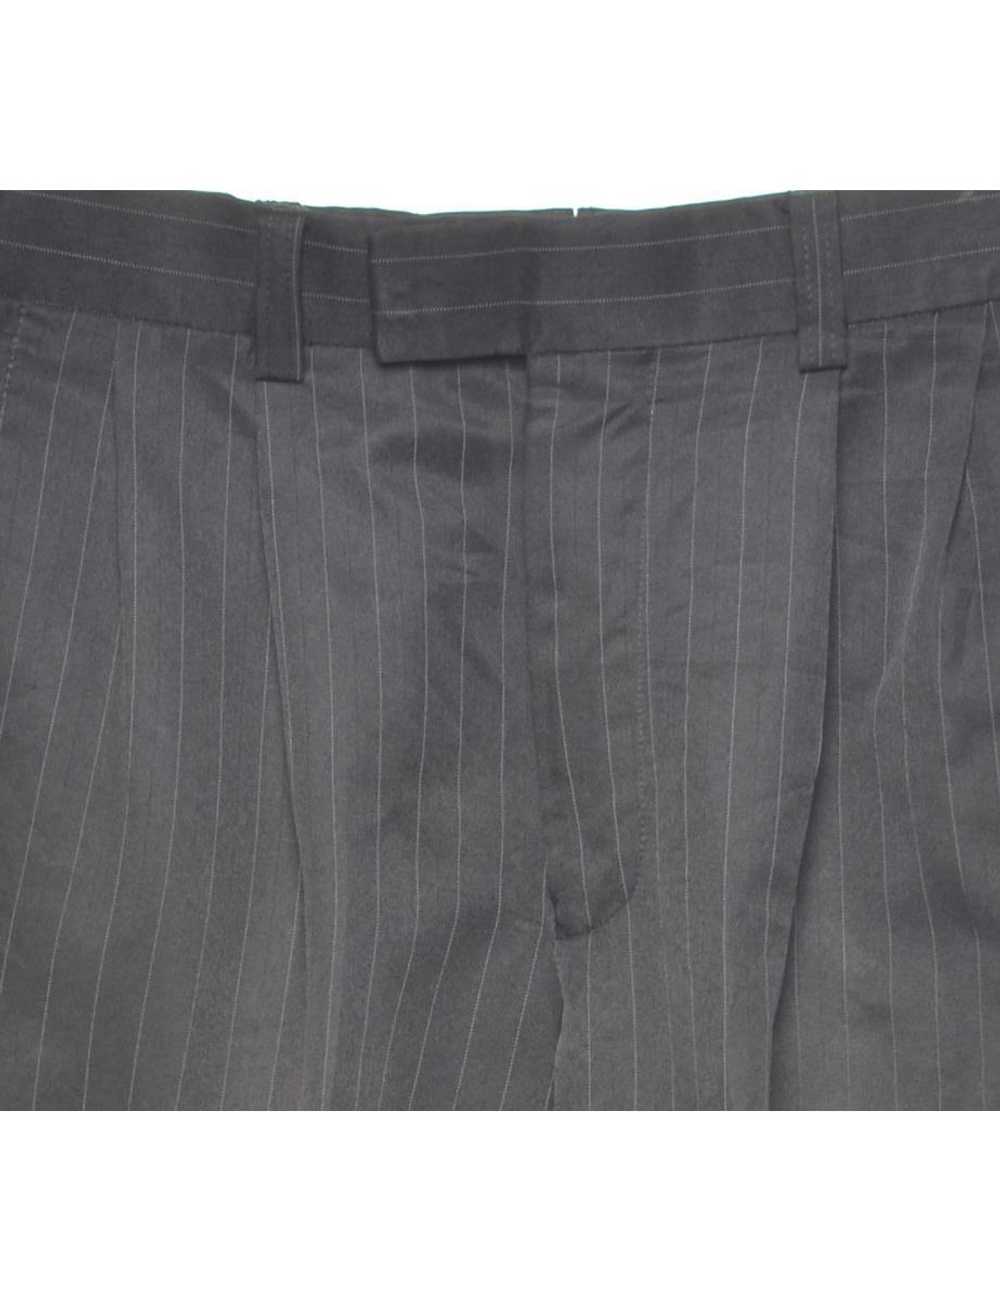 Pinstriped Black Classic Suit Trousers - W30 L30 - image 3